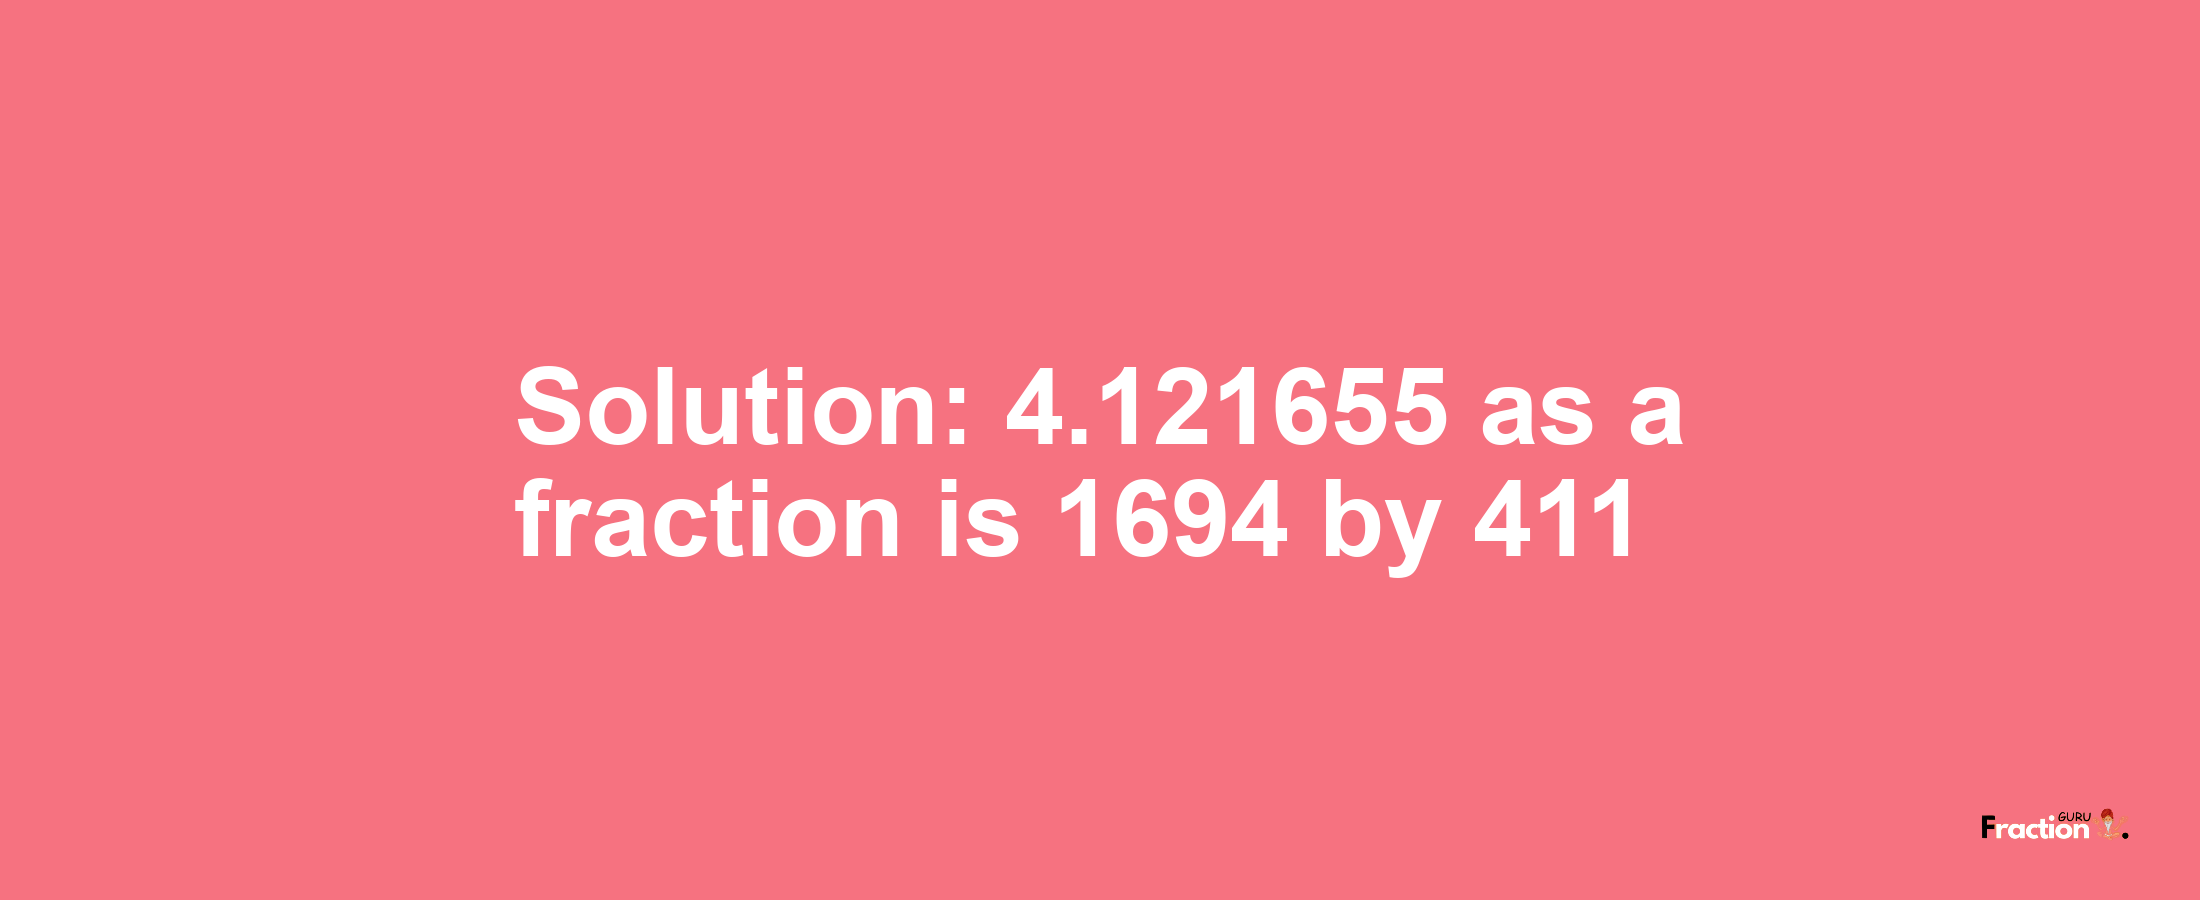 Solution:4.121655 as a fraction is 1694/411